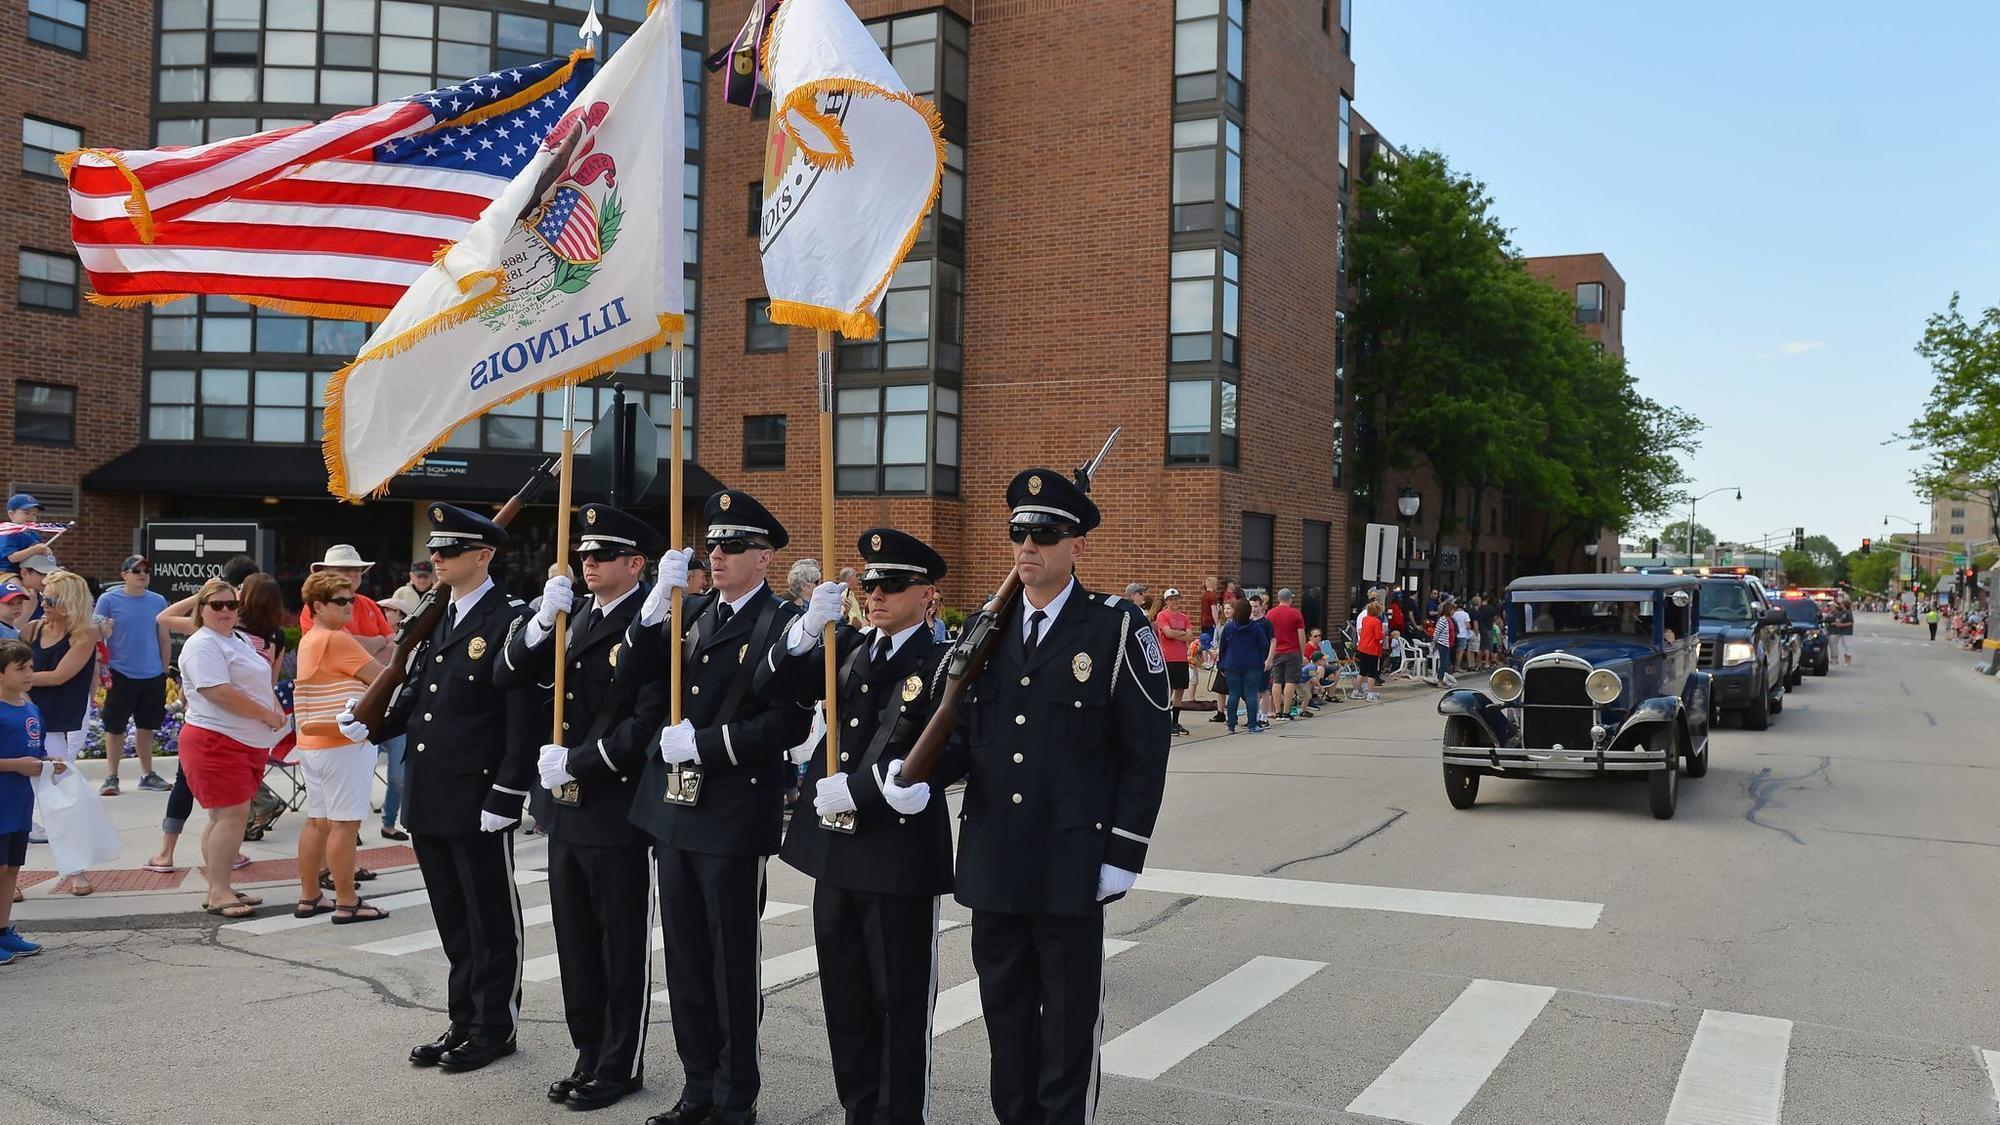 Large crowd expected for 99th annual Arlington Heights Memorial Day